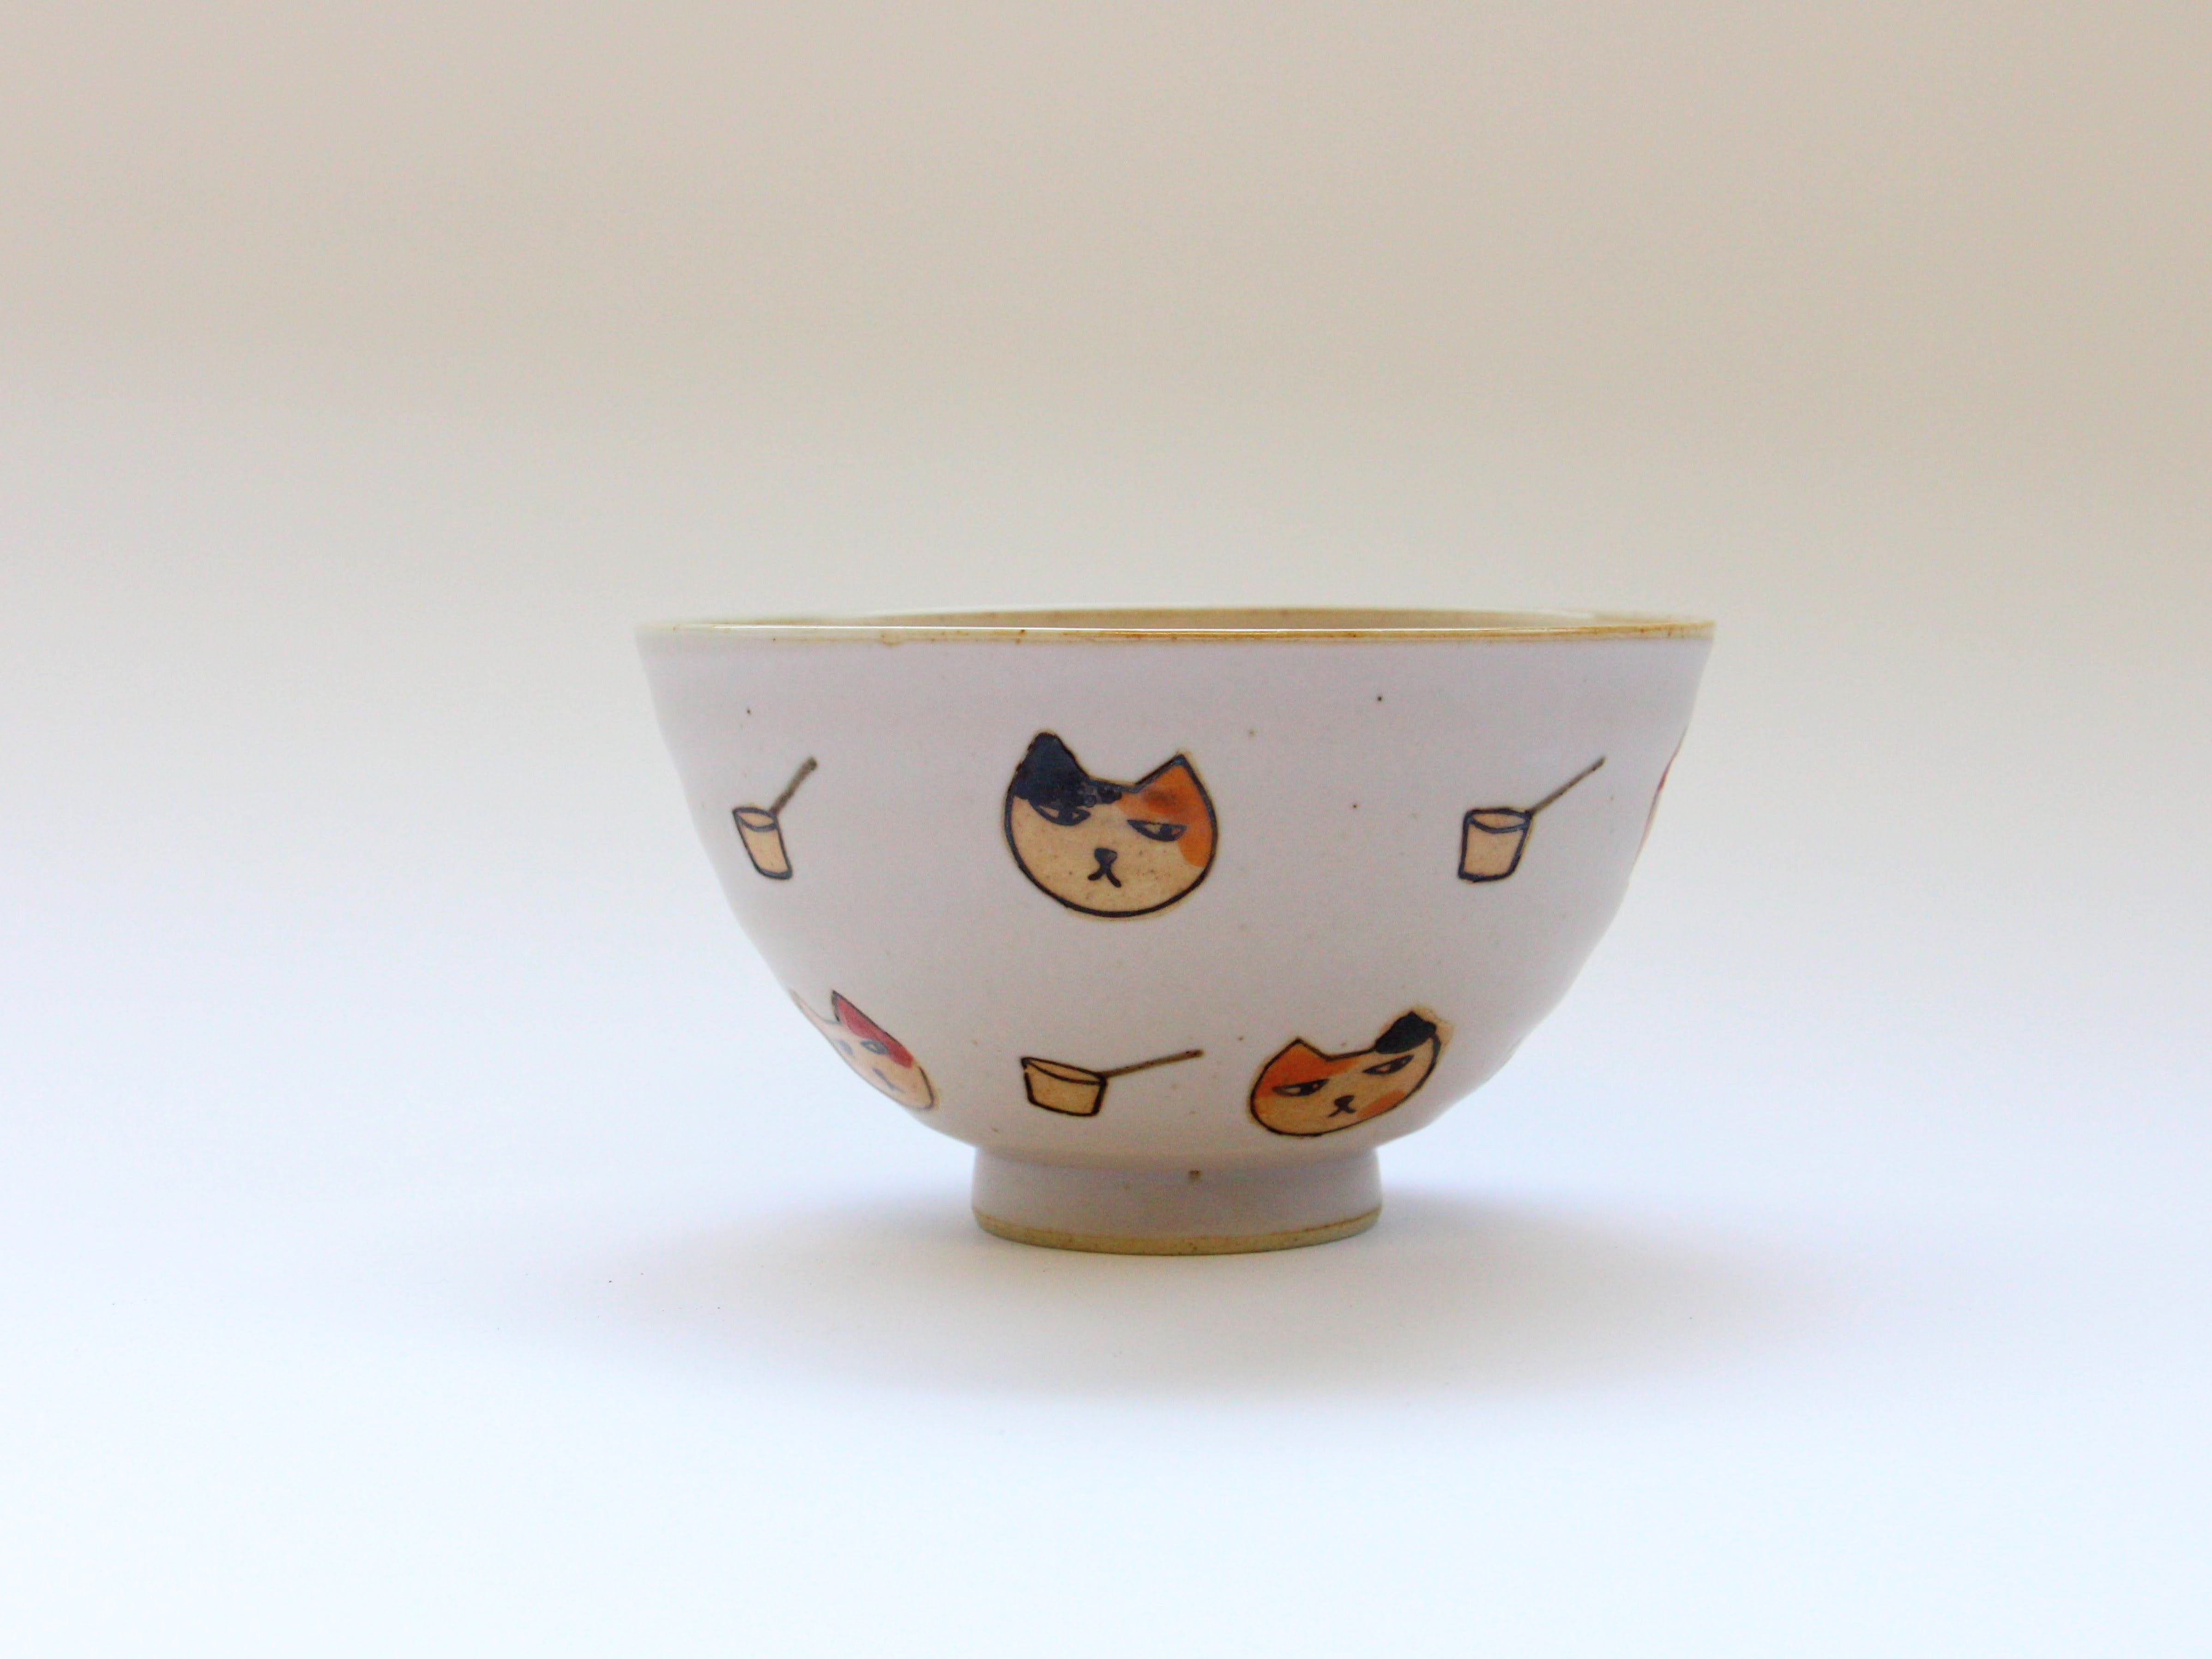 Both the cat and the ladle are rice bowls pink [Soebu Pottery]